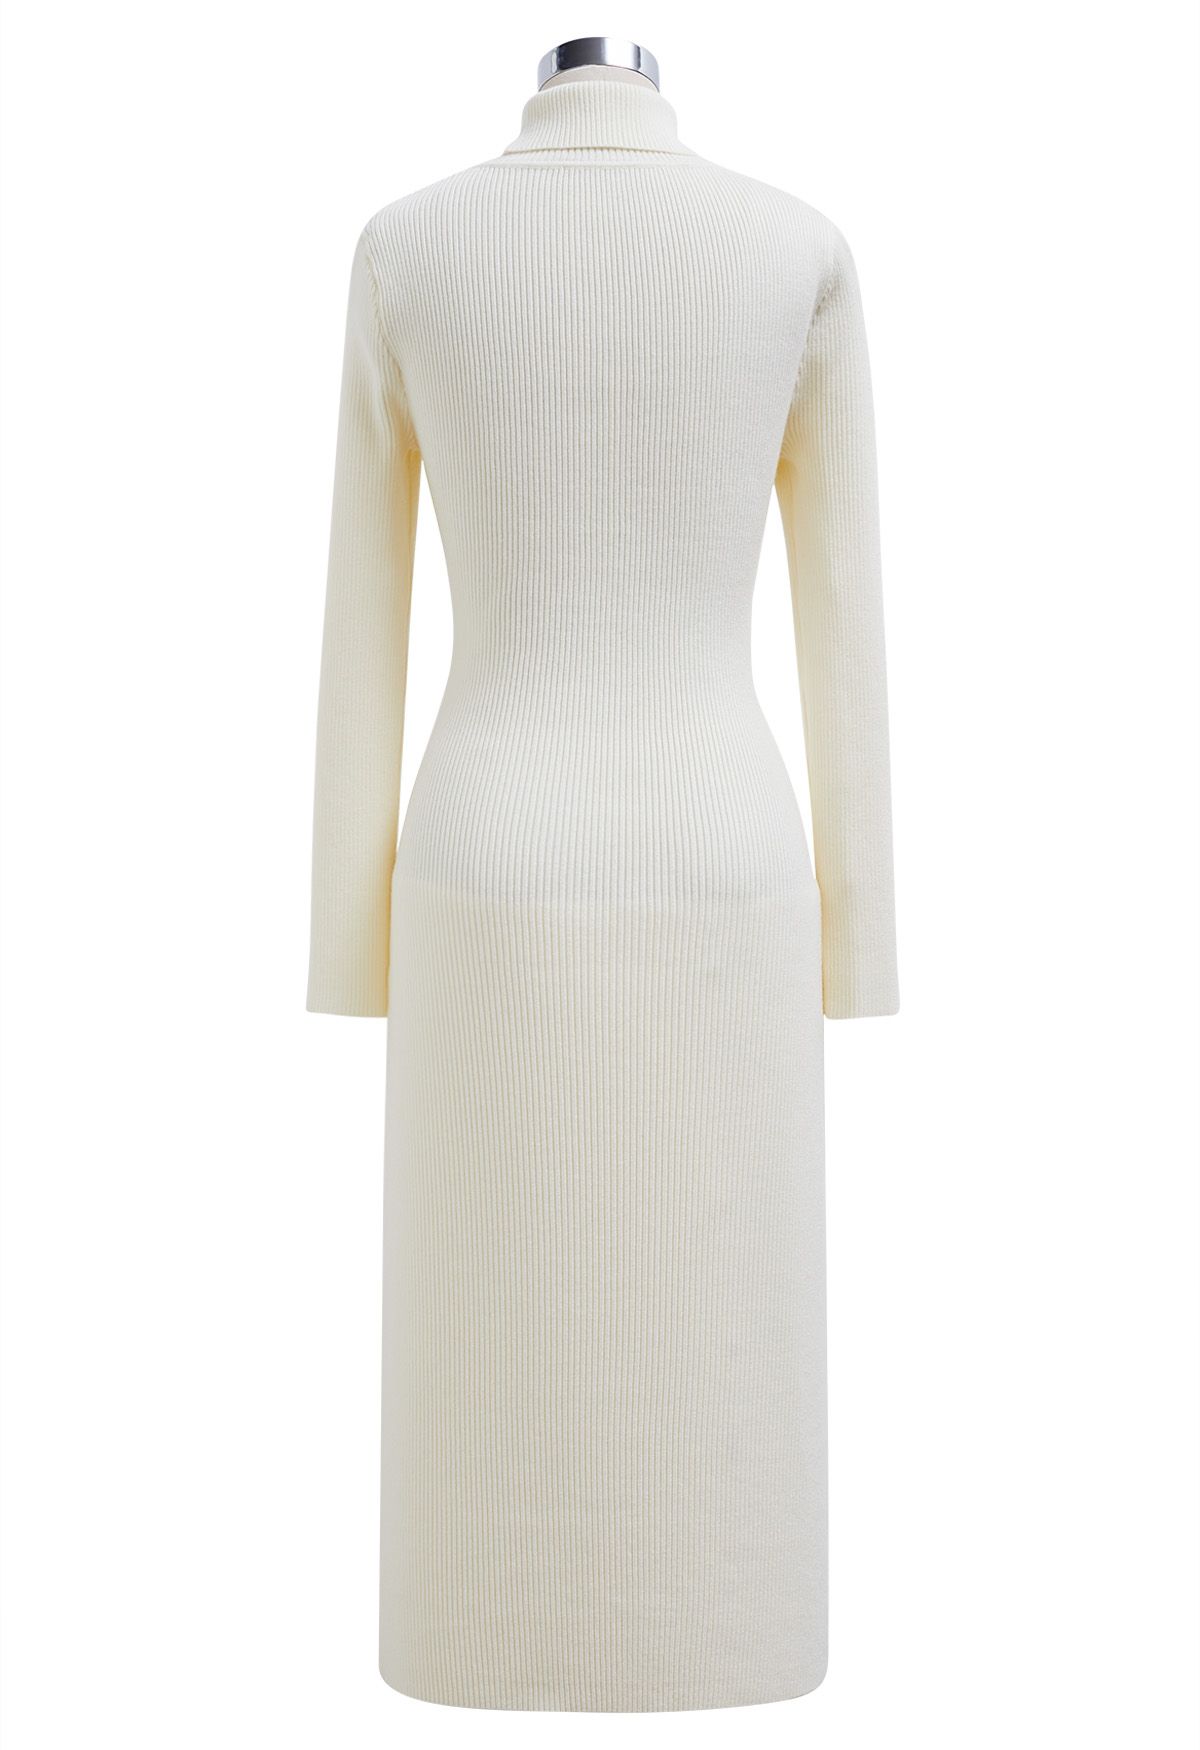 Turtleneck Mesh Inserted O-Ring Waist Knit Dress in Ivory